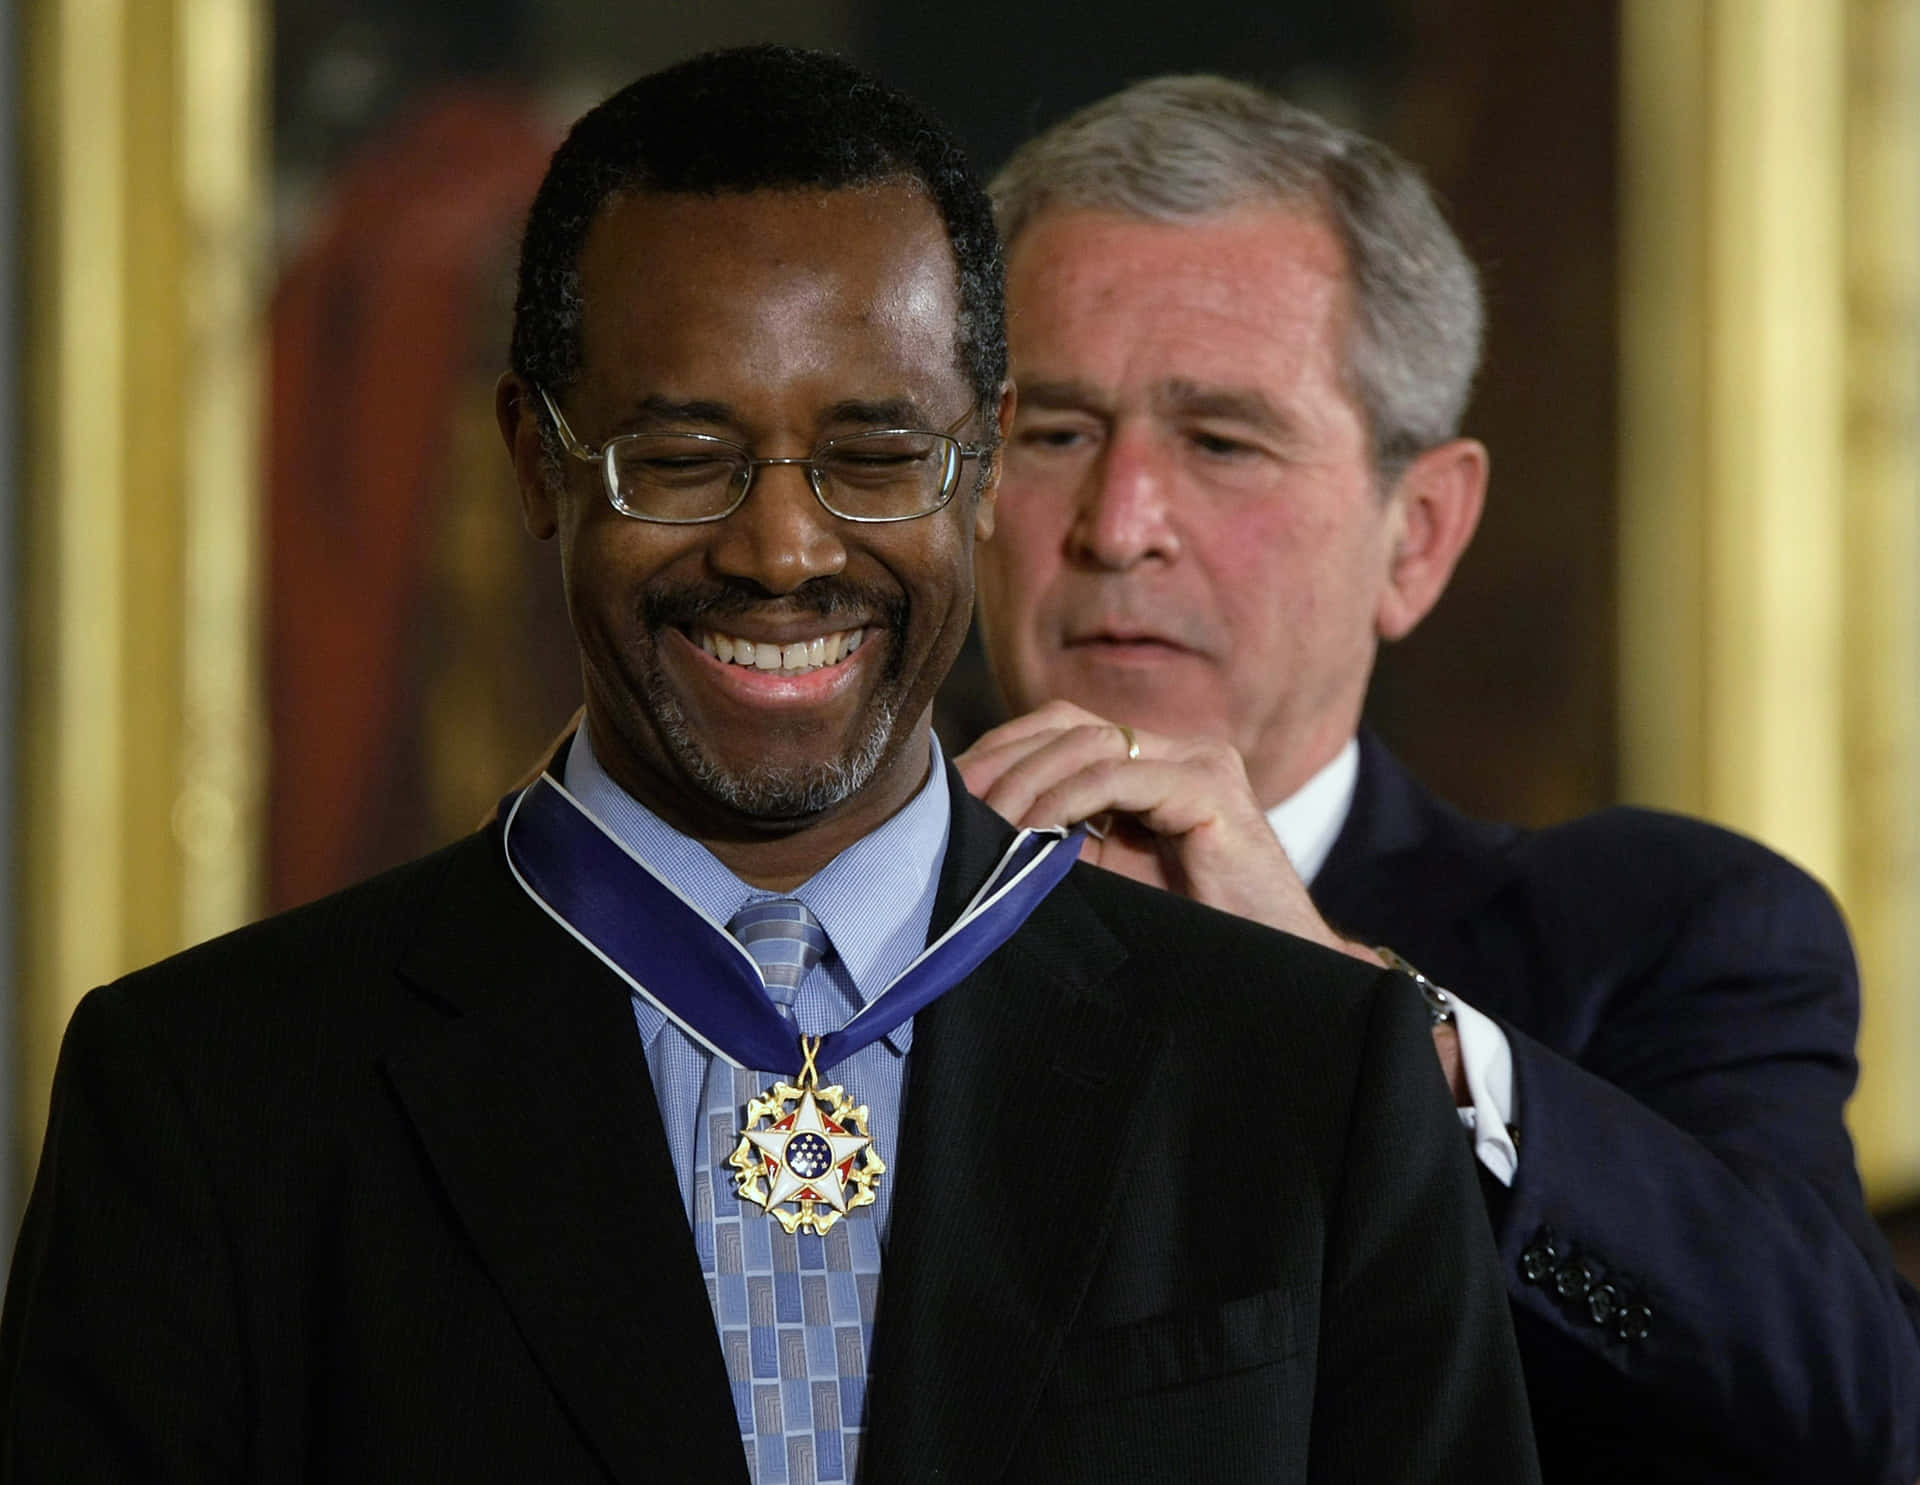 Ben Carson and George Bush Deep in Discussion Wallpaper